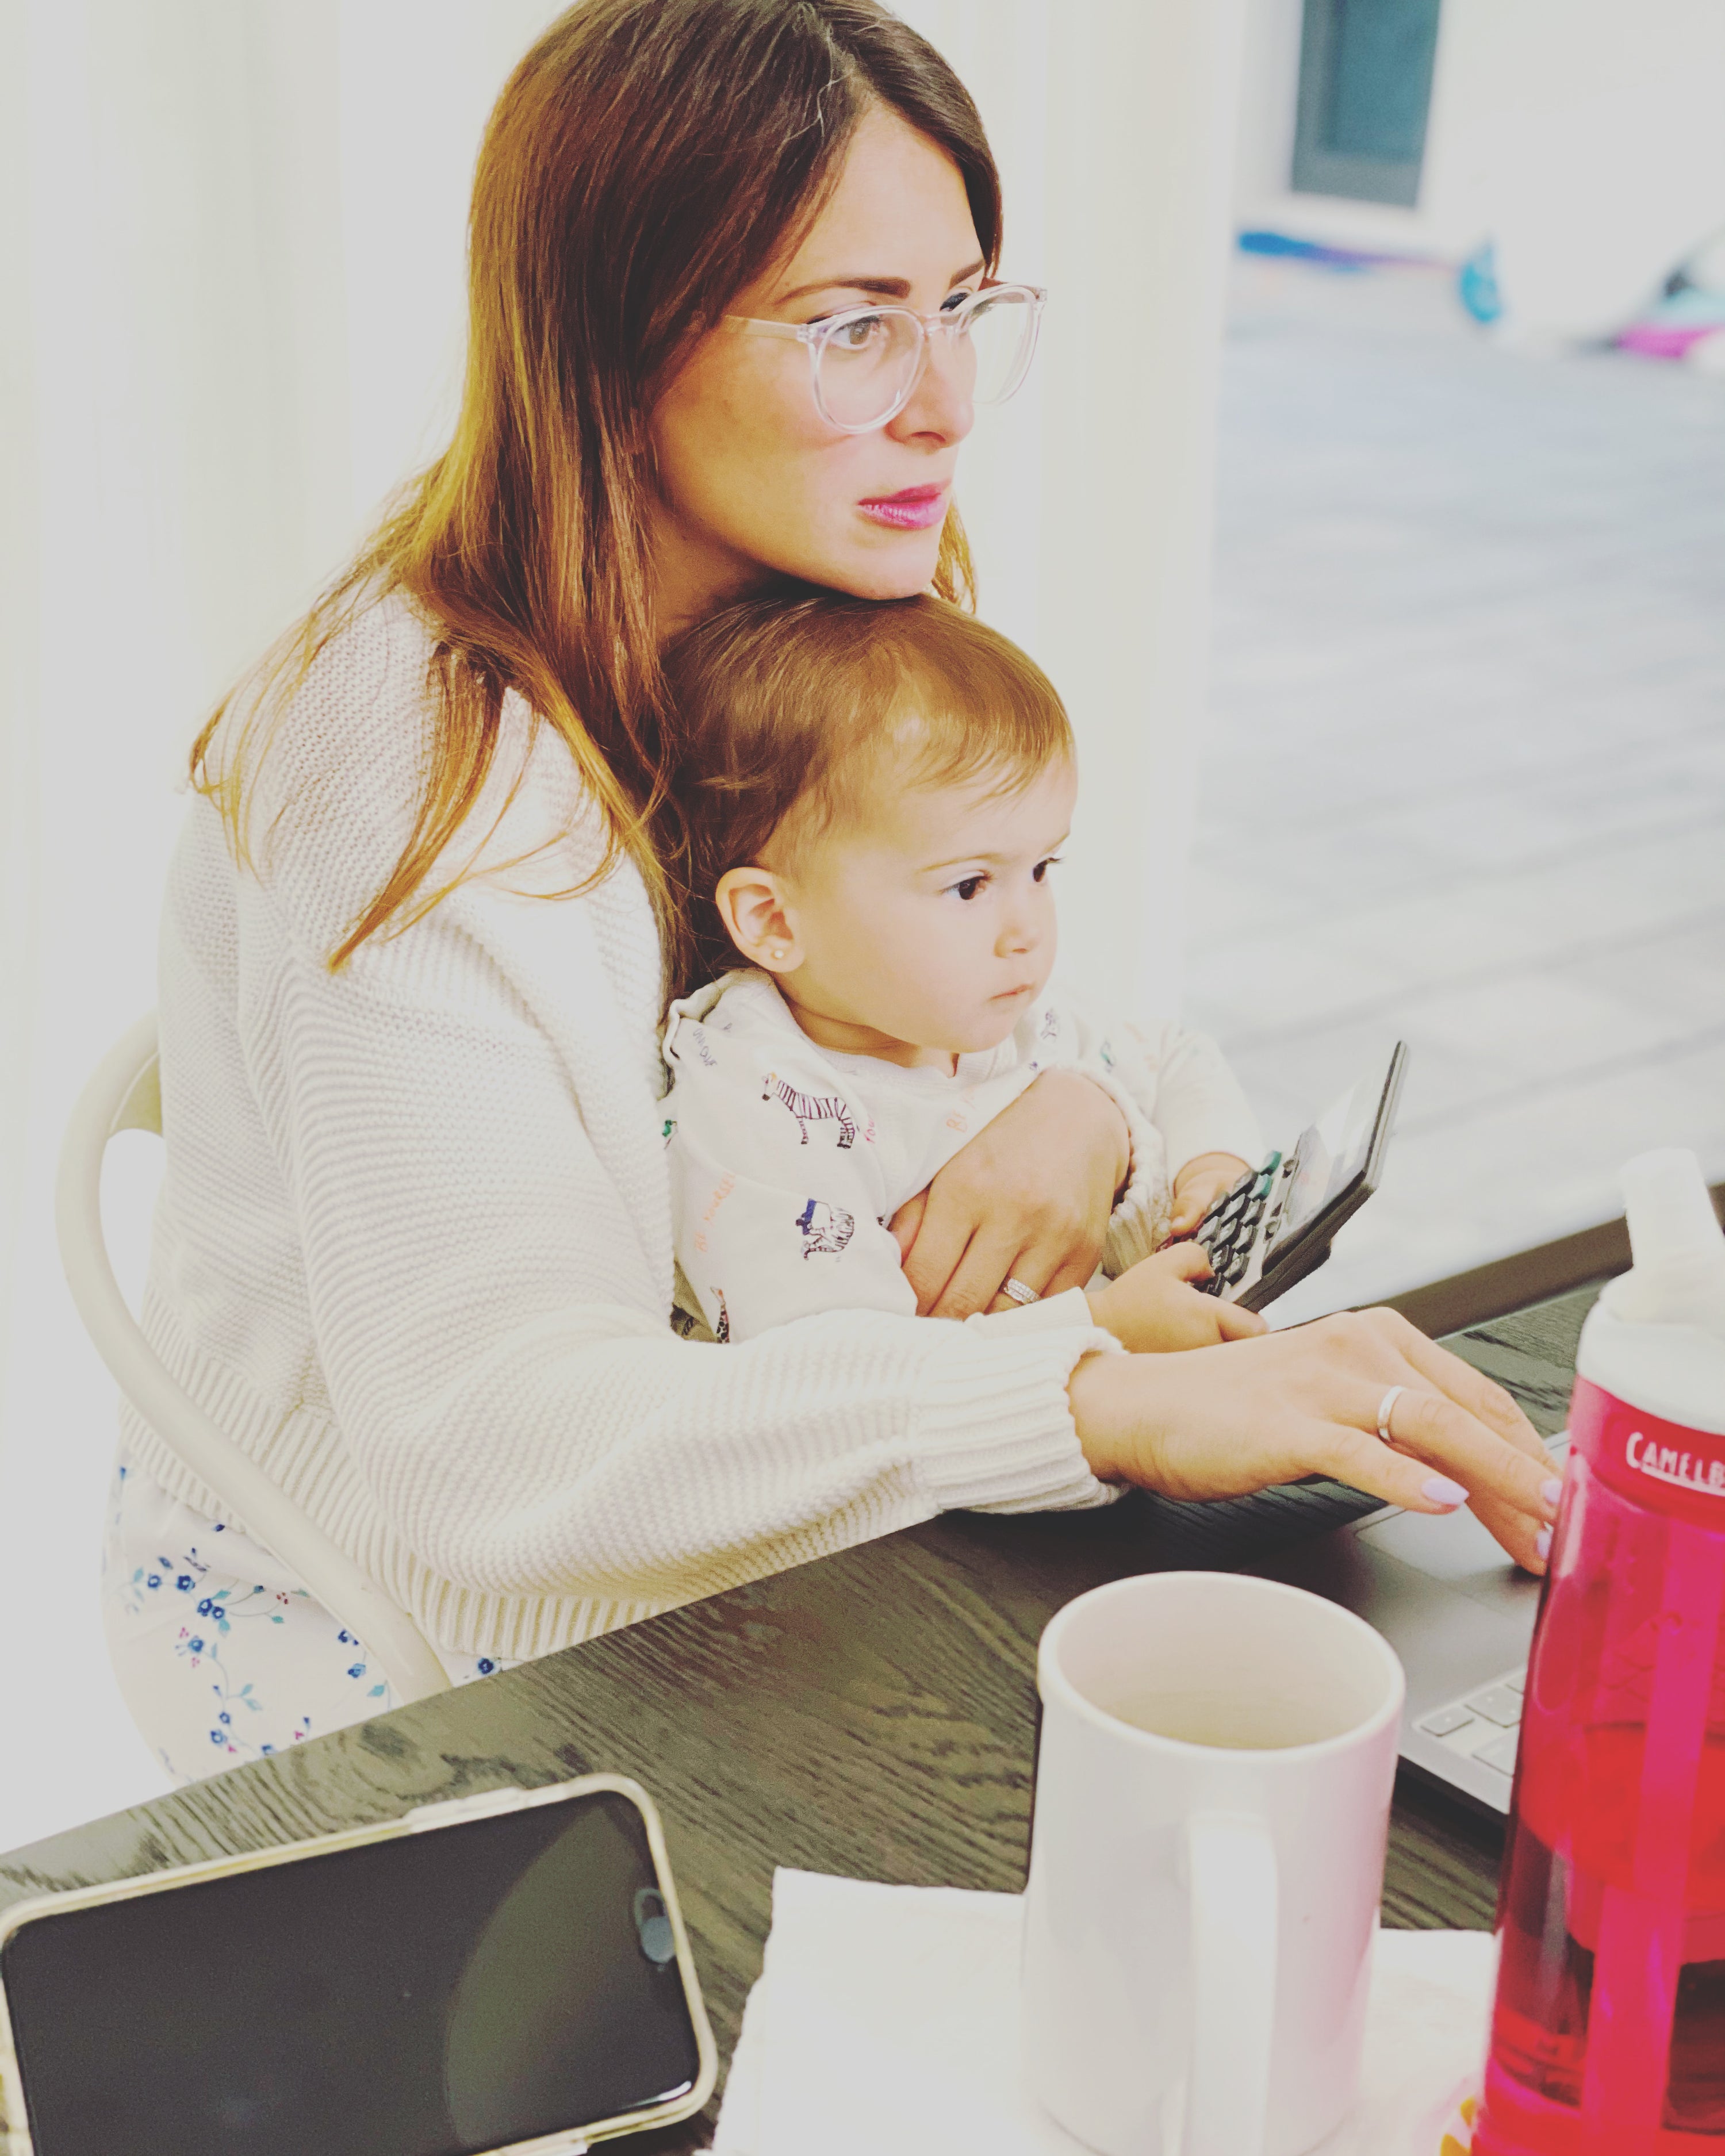 Woman in glasses and a white sweater holding her baby while working on the computer